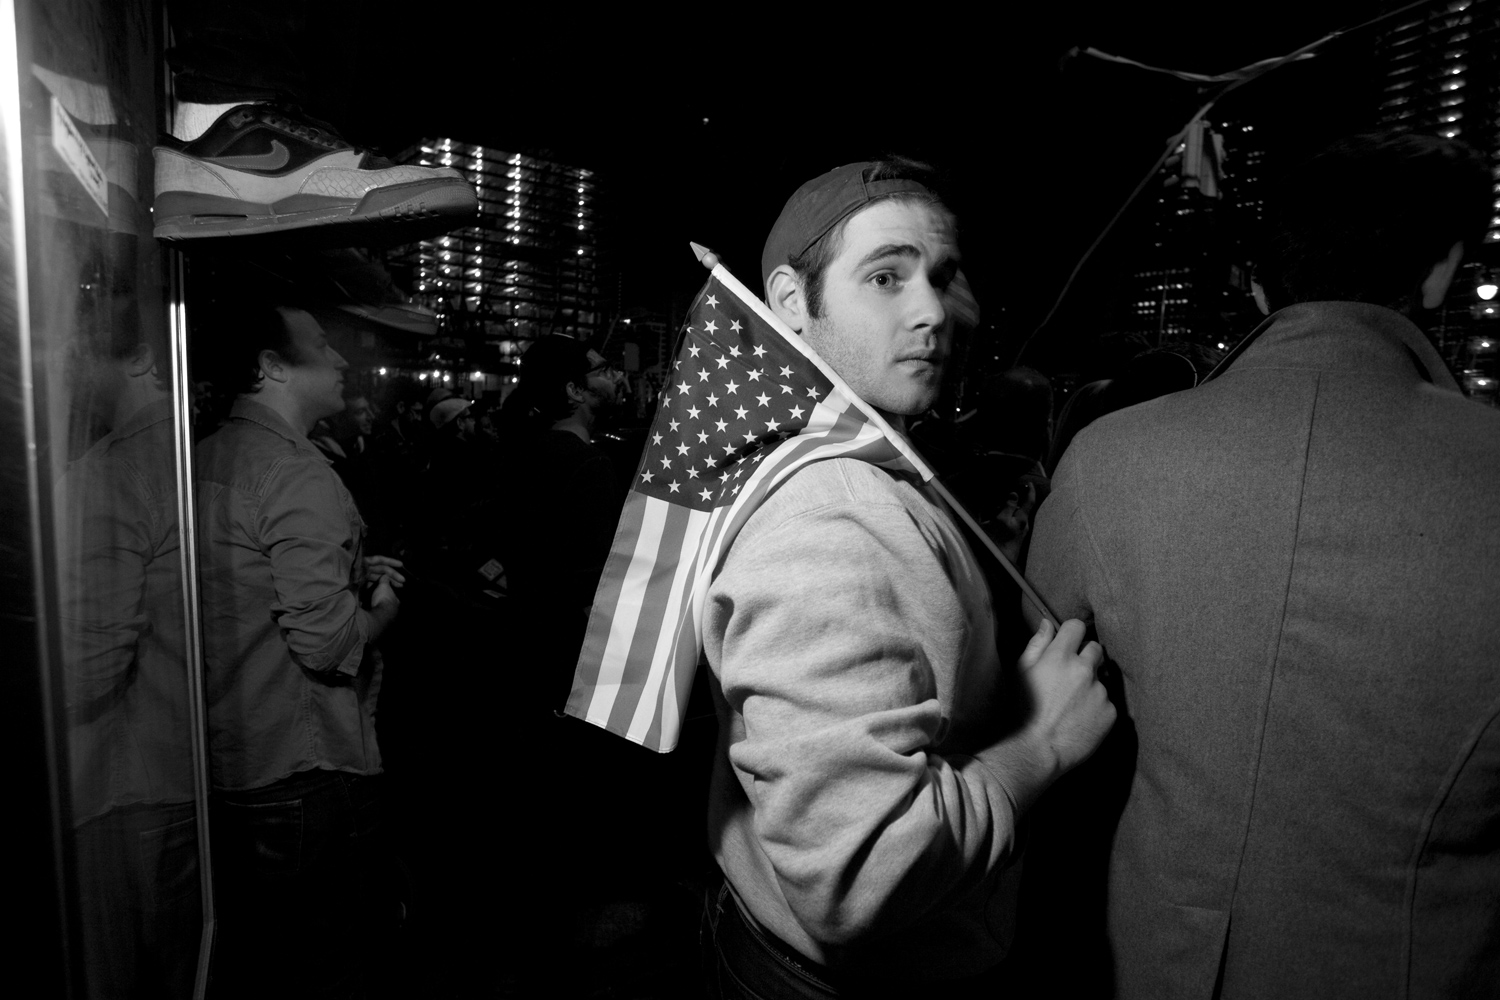 Amid the cheers it was easy to spot those who had come to Ground Zero not for the boisterous celebration, but to reflect on the magnitude of the night.